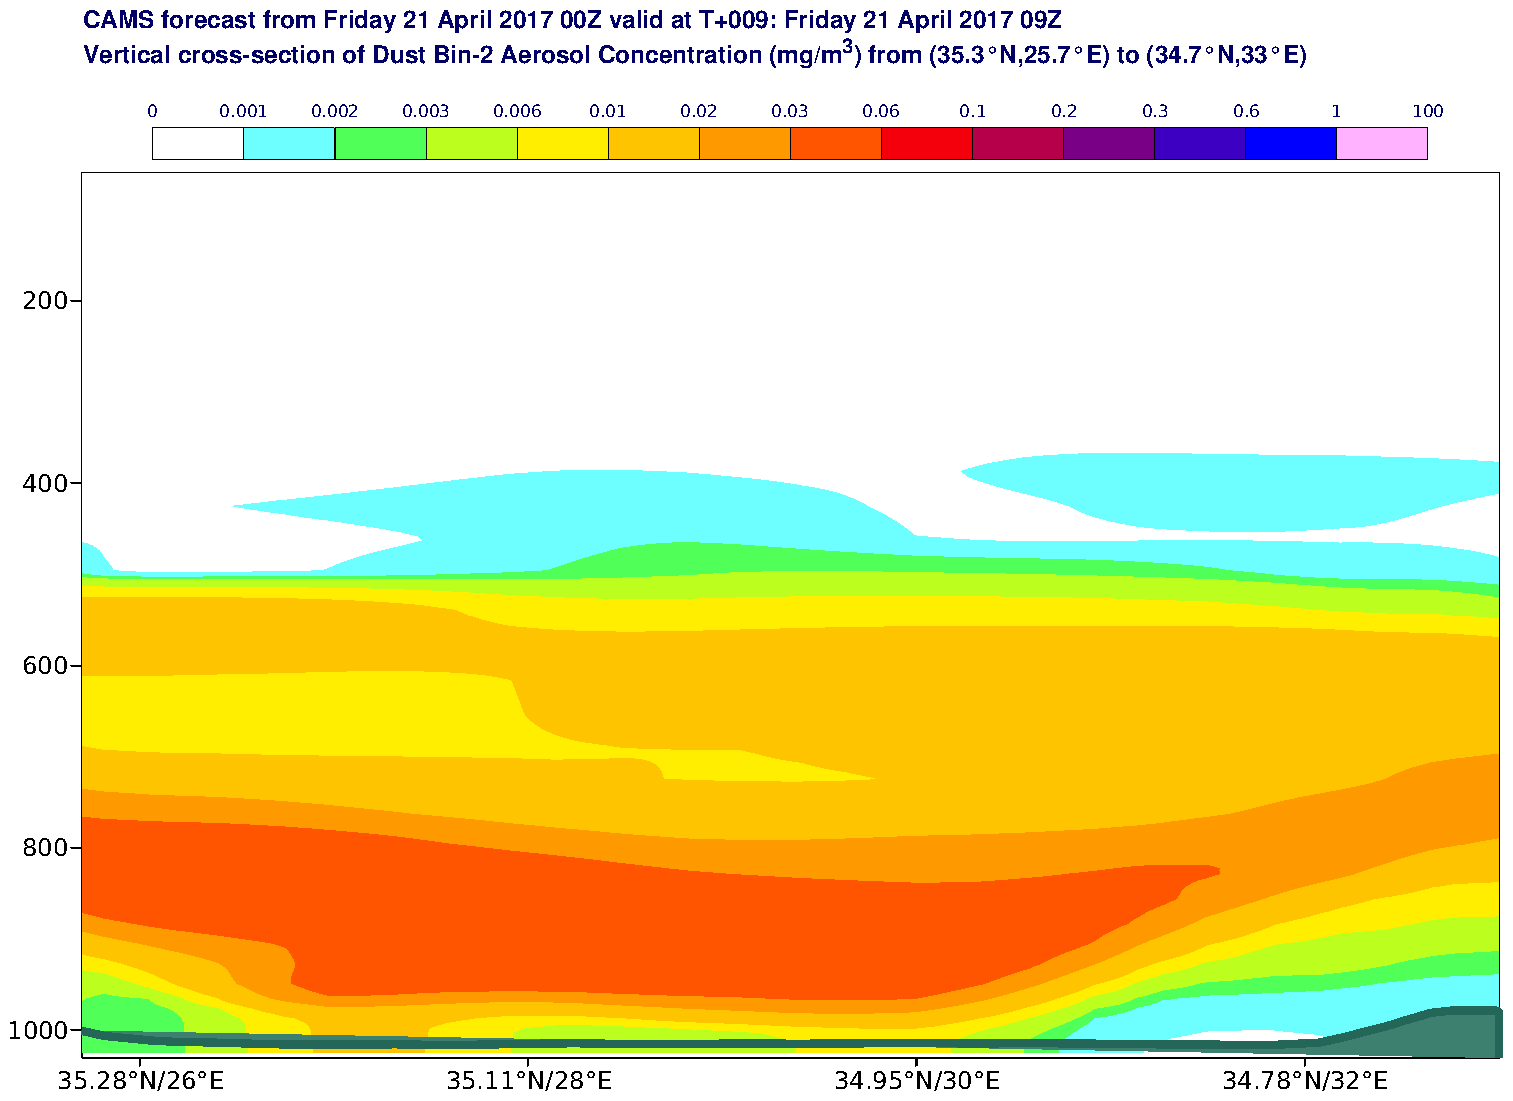 Vertical cross-section of Dust Bin-2 Aerosol Concentration (mg/m3) valid at T9 - 2017-04-21 09:00